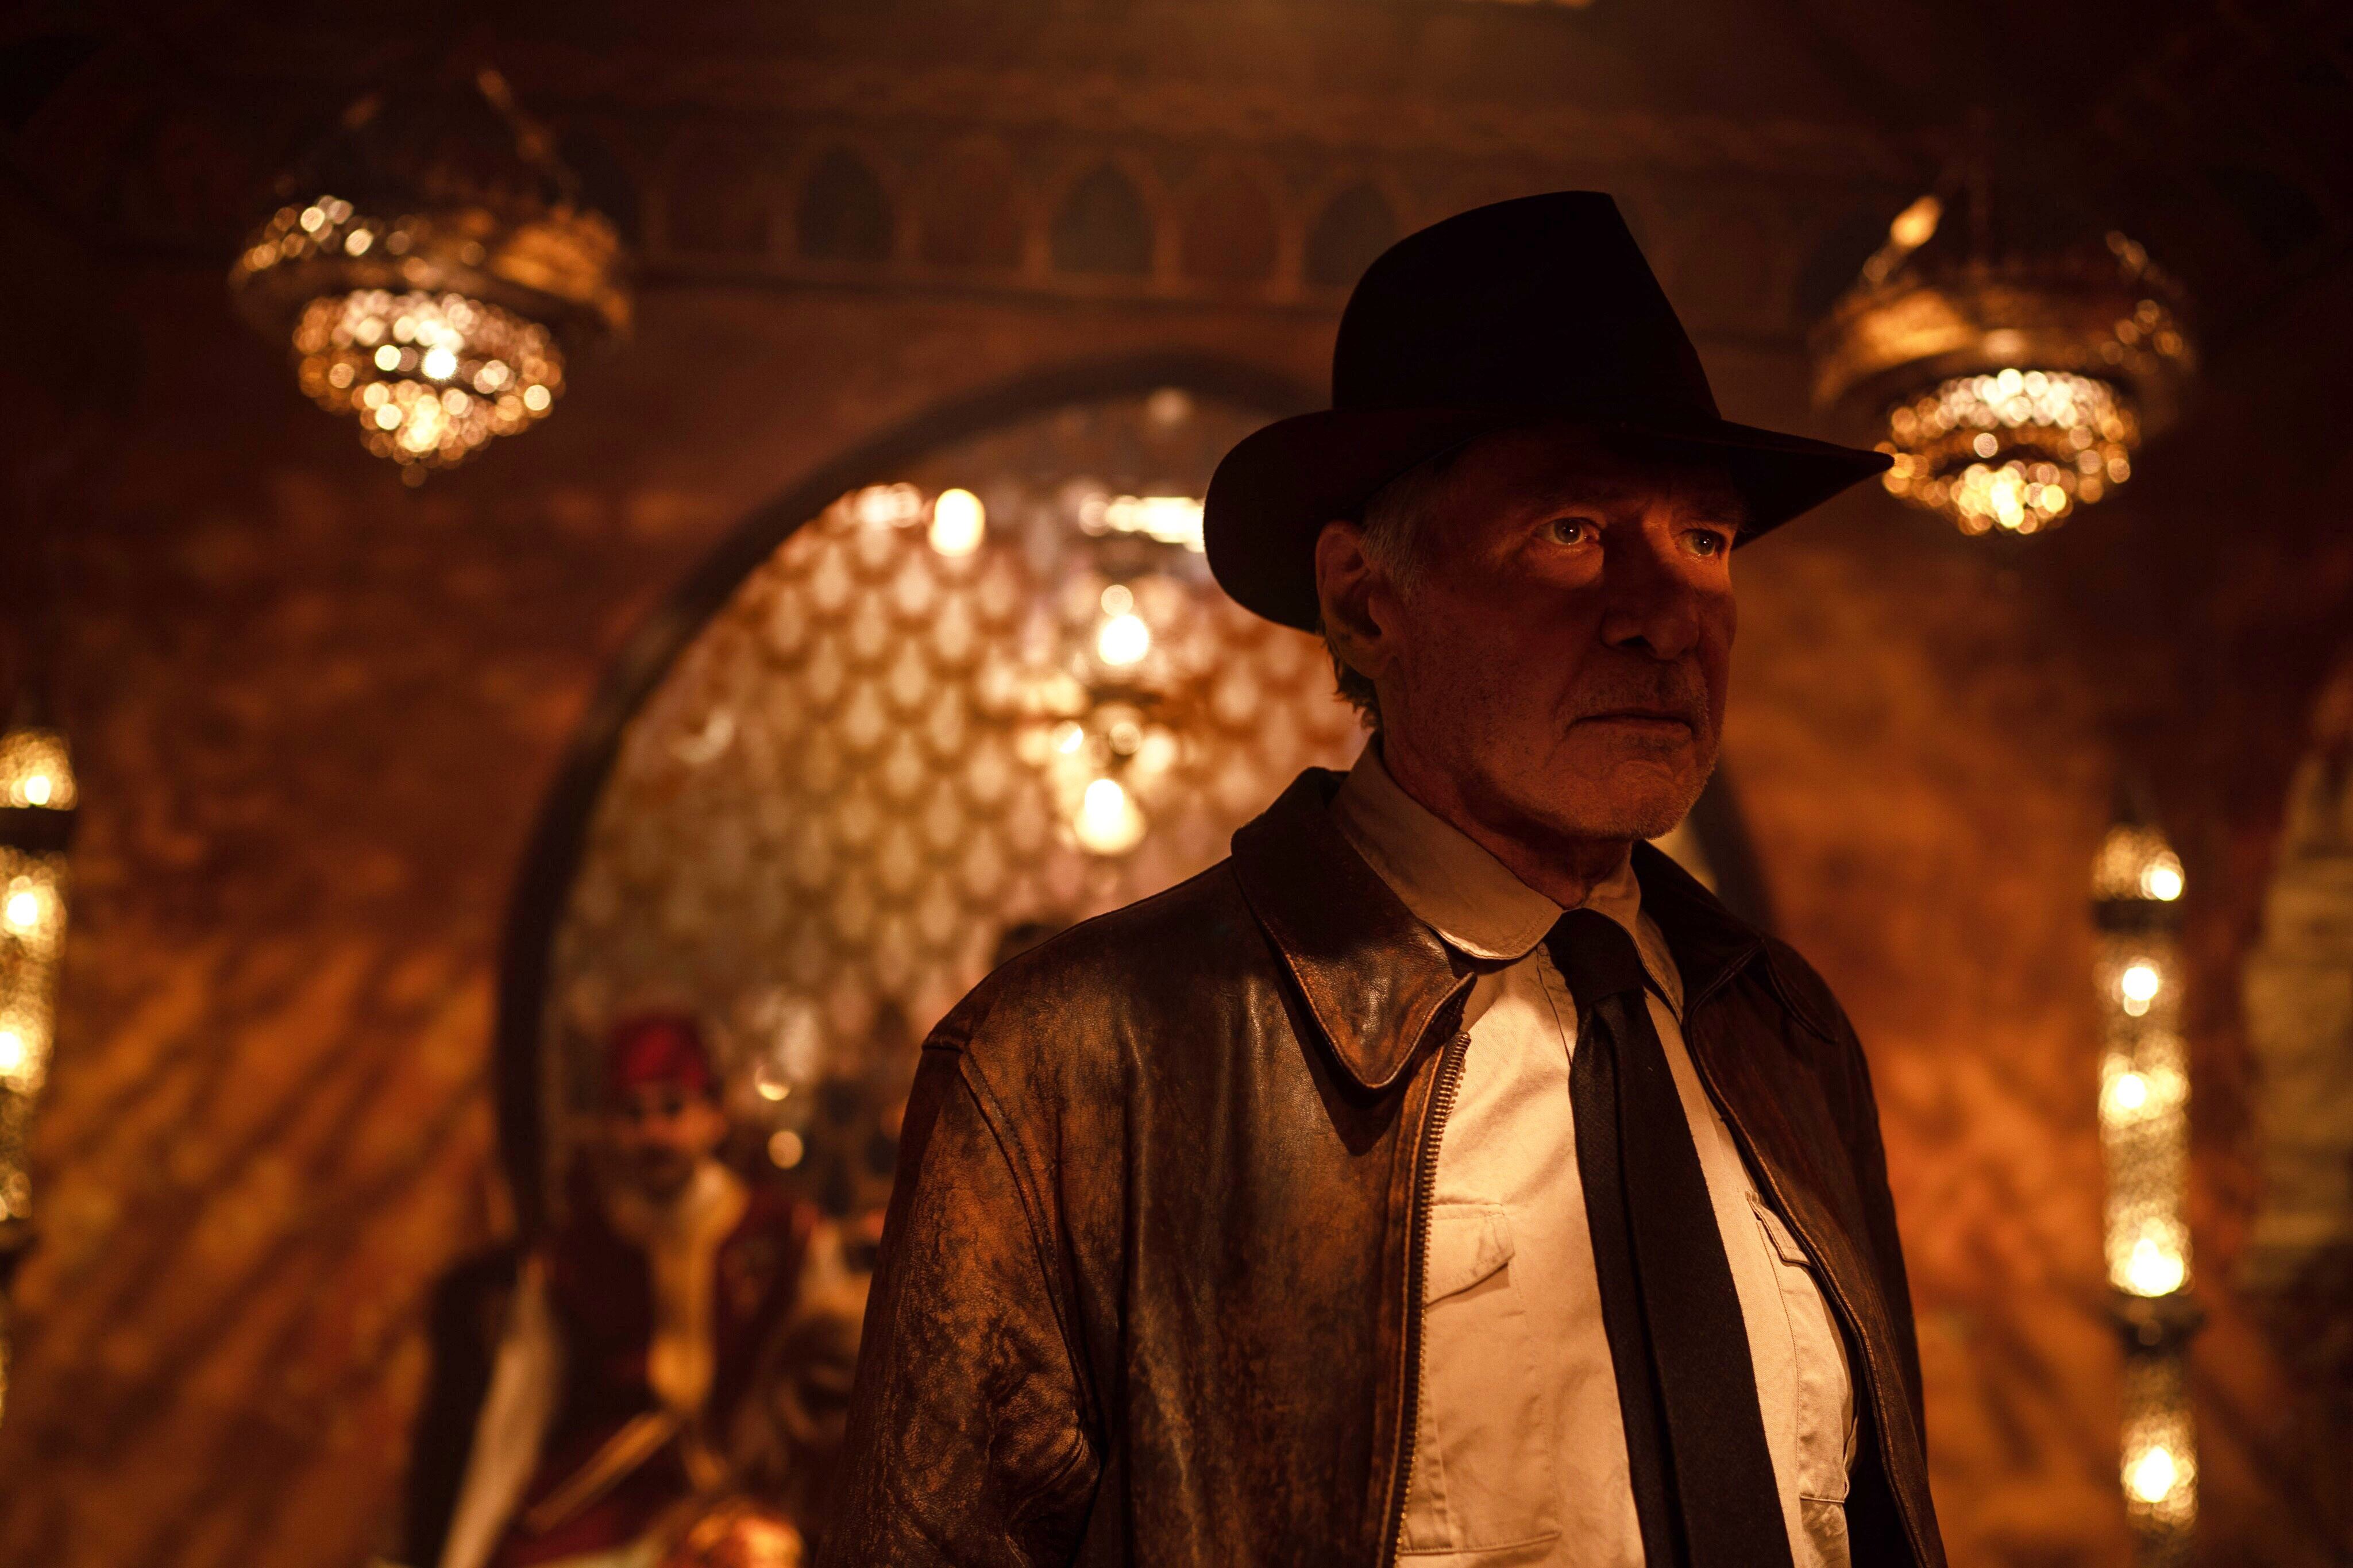 The Complete Indiana Jones Franchise Is Coming to Disney+